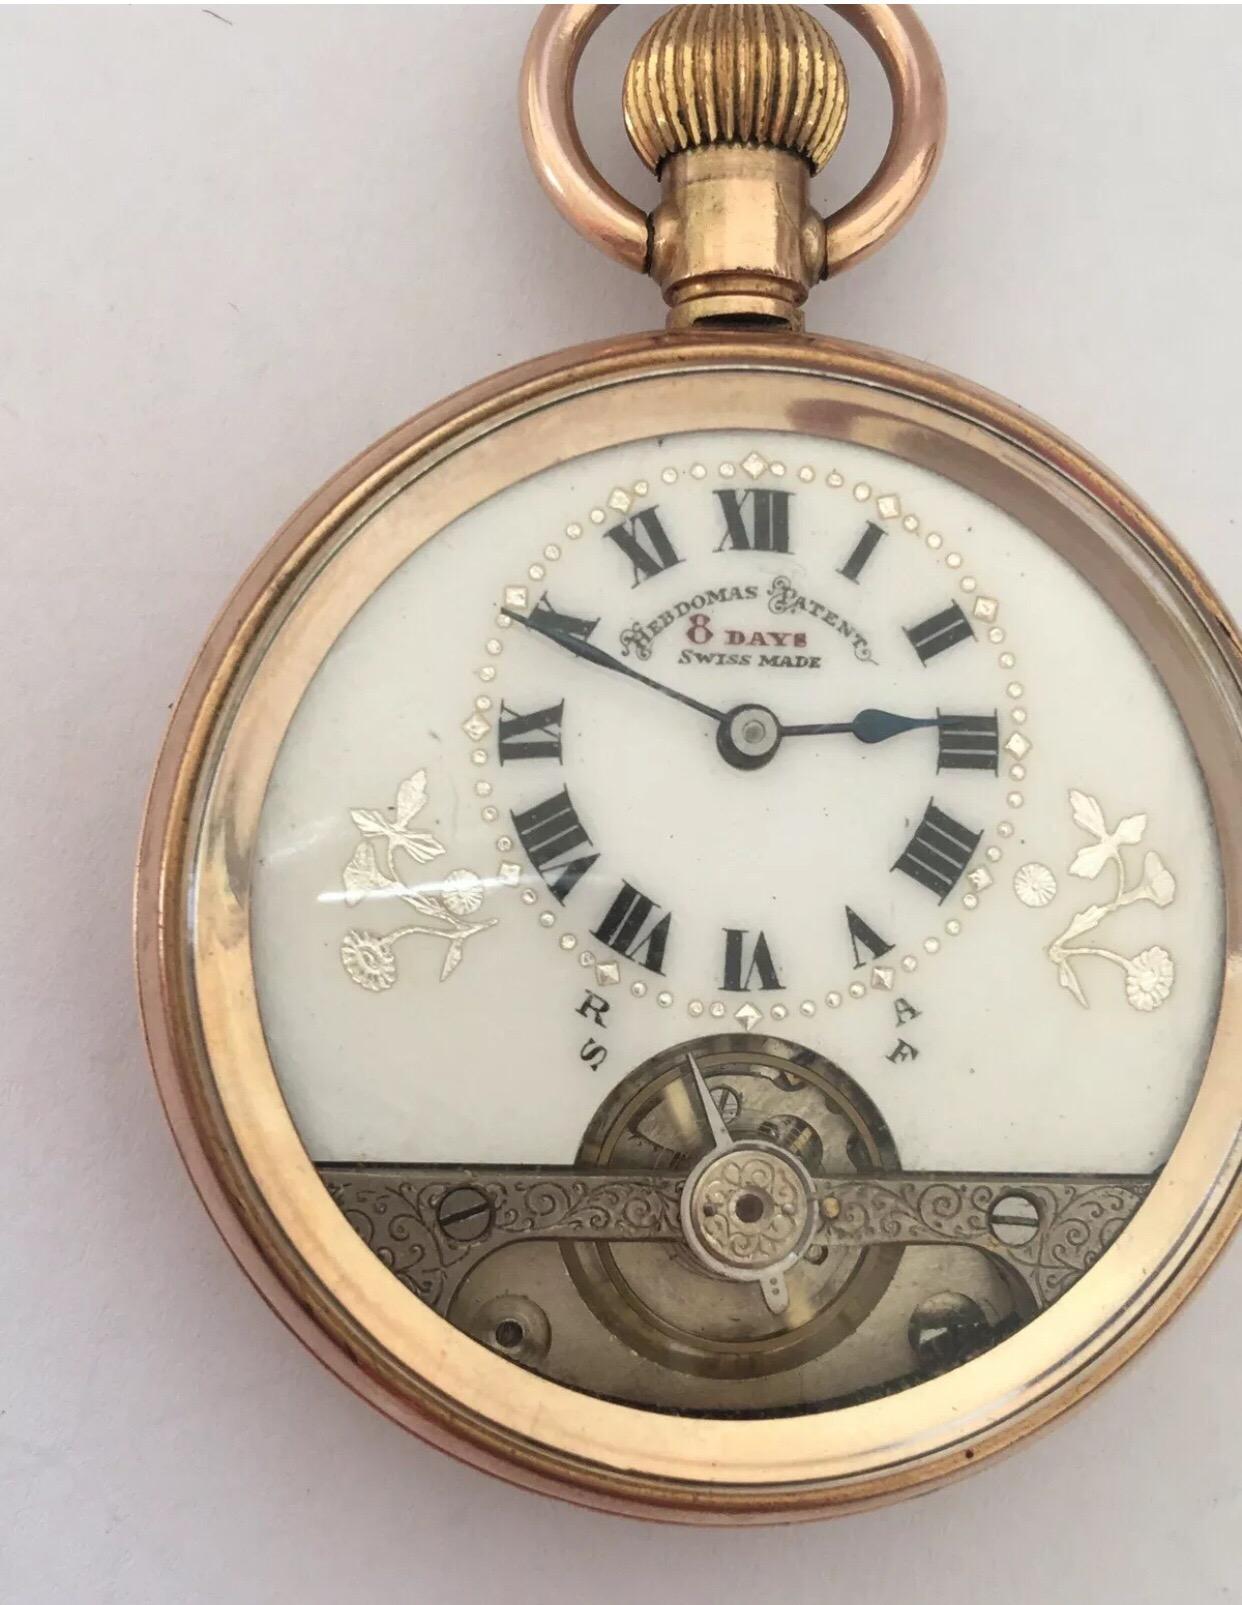 An 8 Days Swiss Made Hebdomas Visible Escapement Gold-Plated Pocket Watch 5